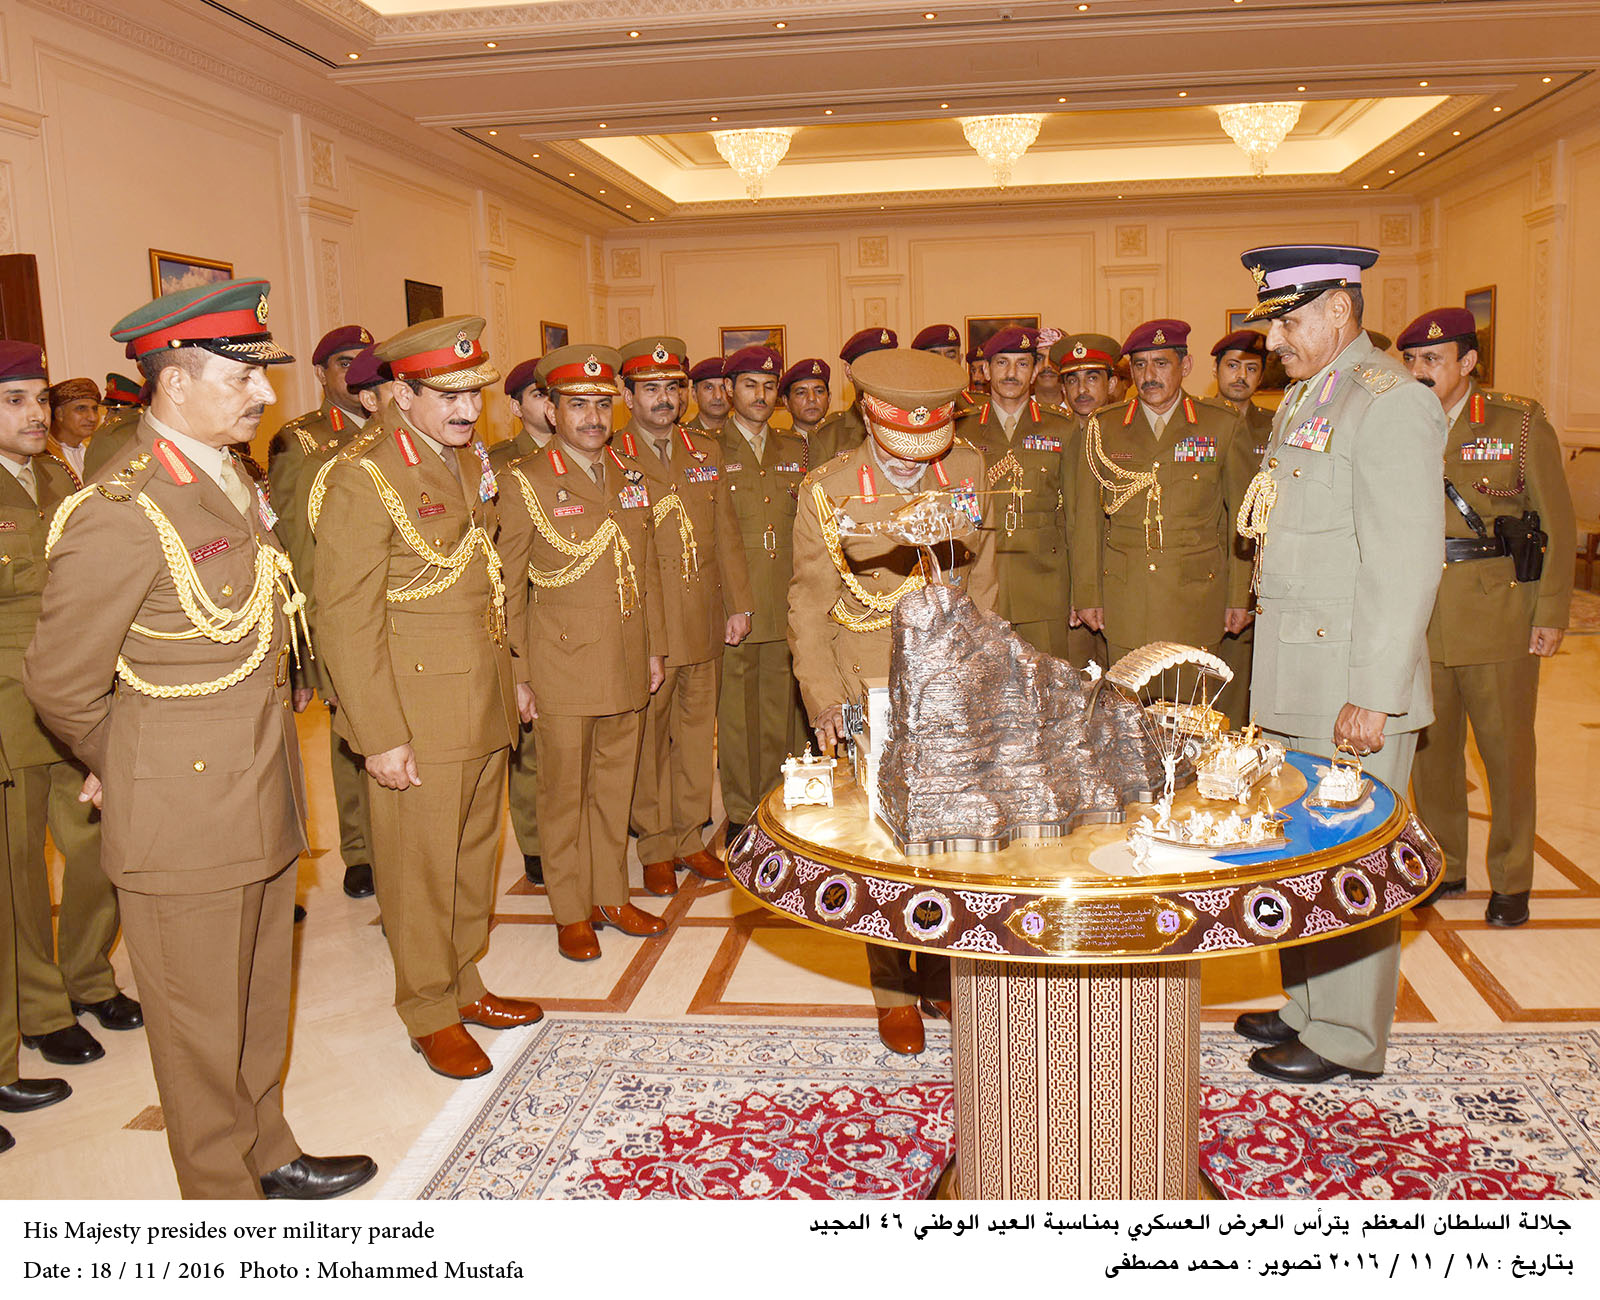 In pictures: His Majesty Sultan Qaboos presides over National Day Parade